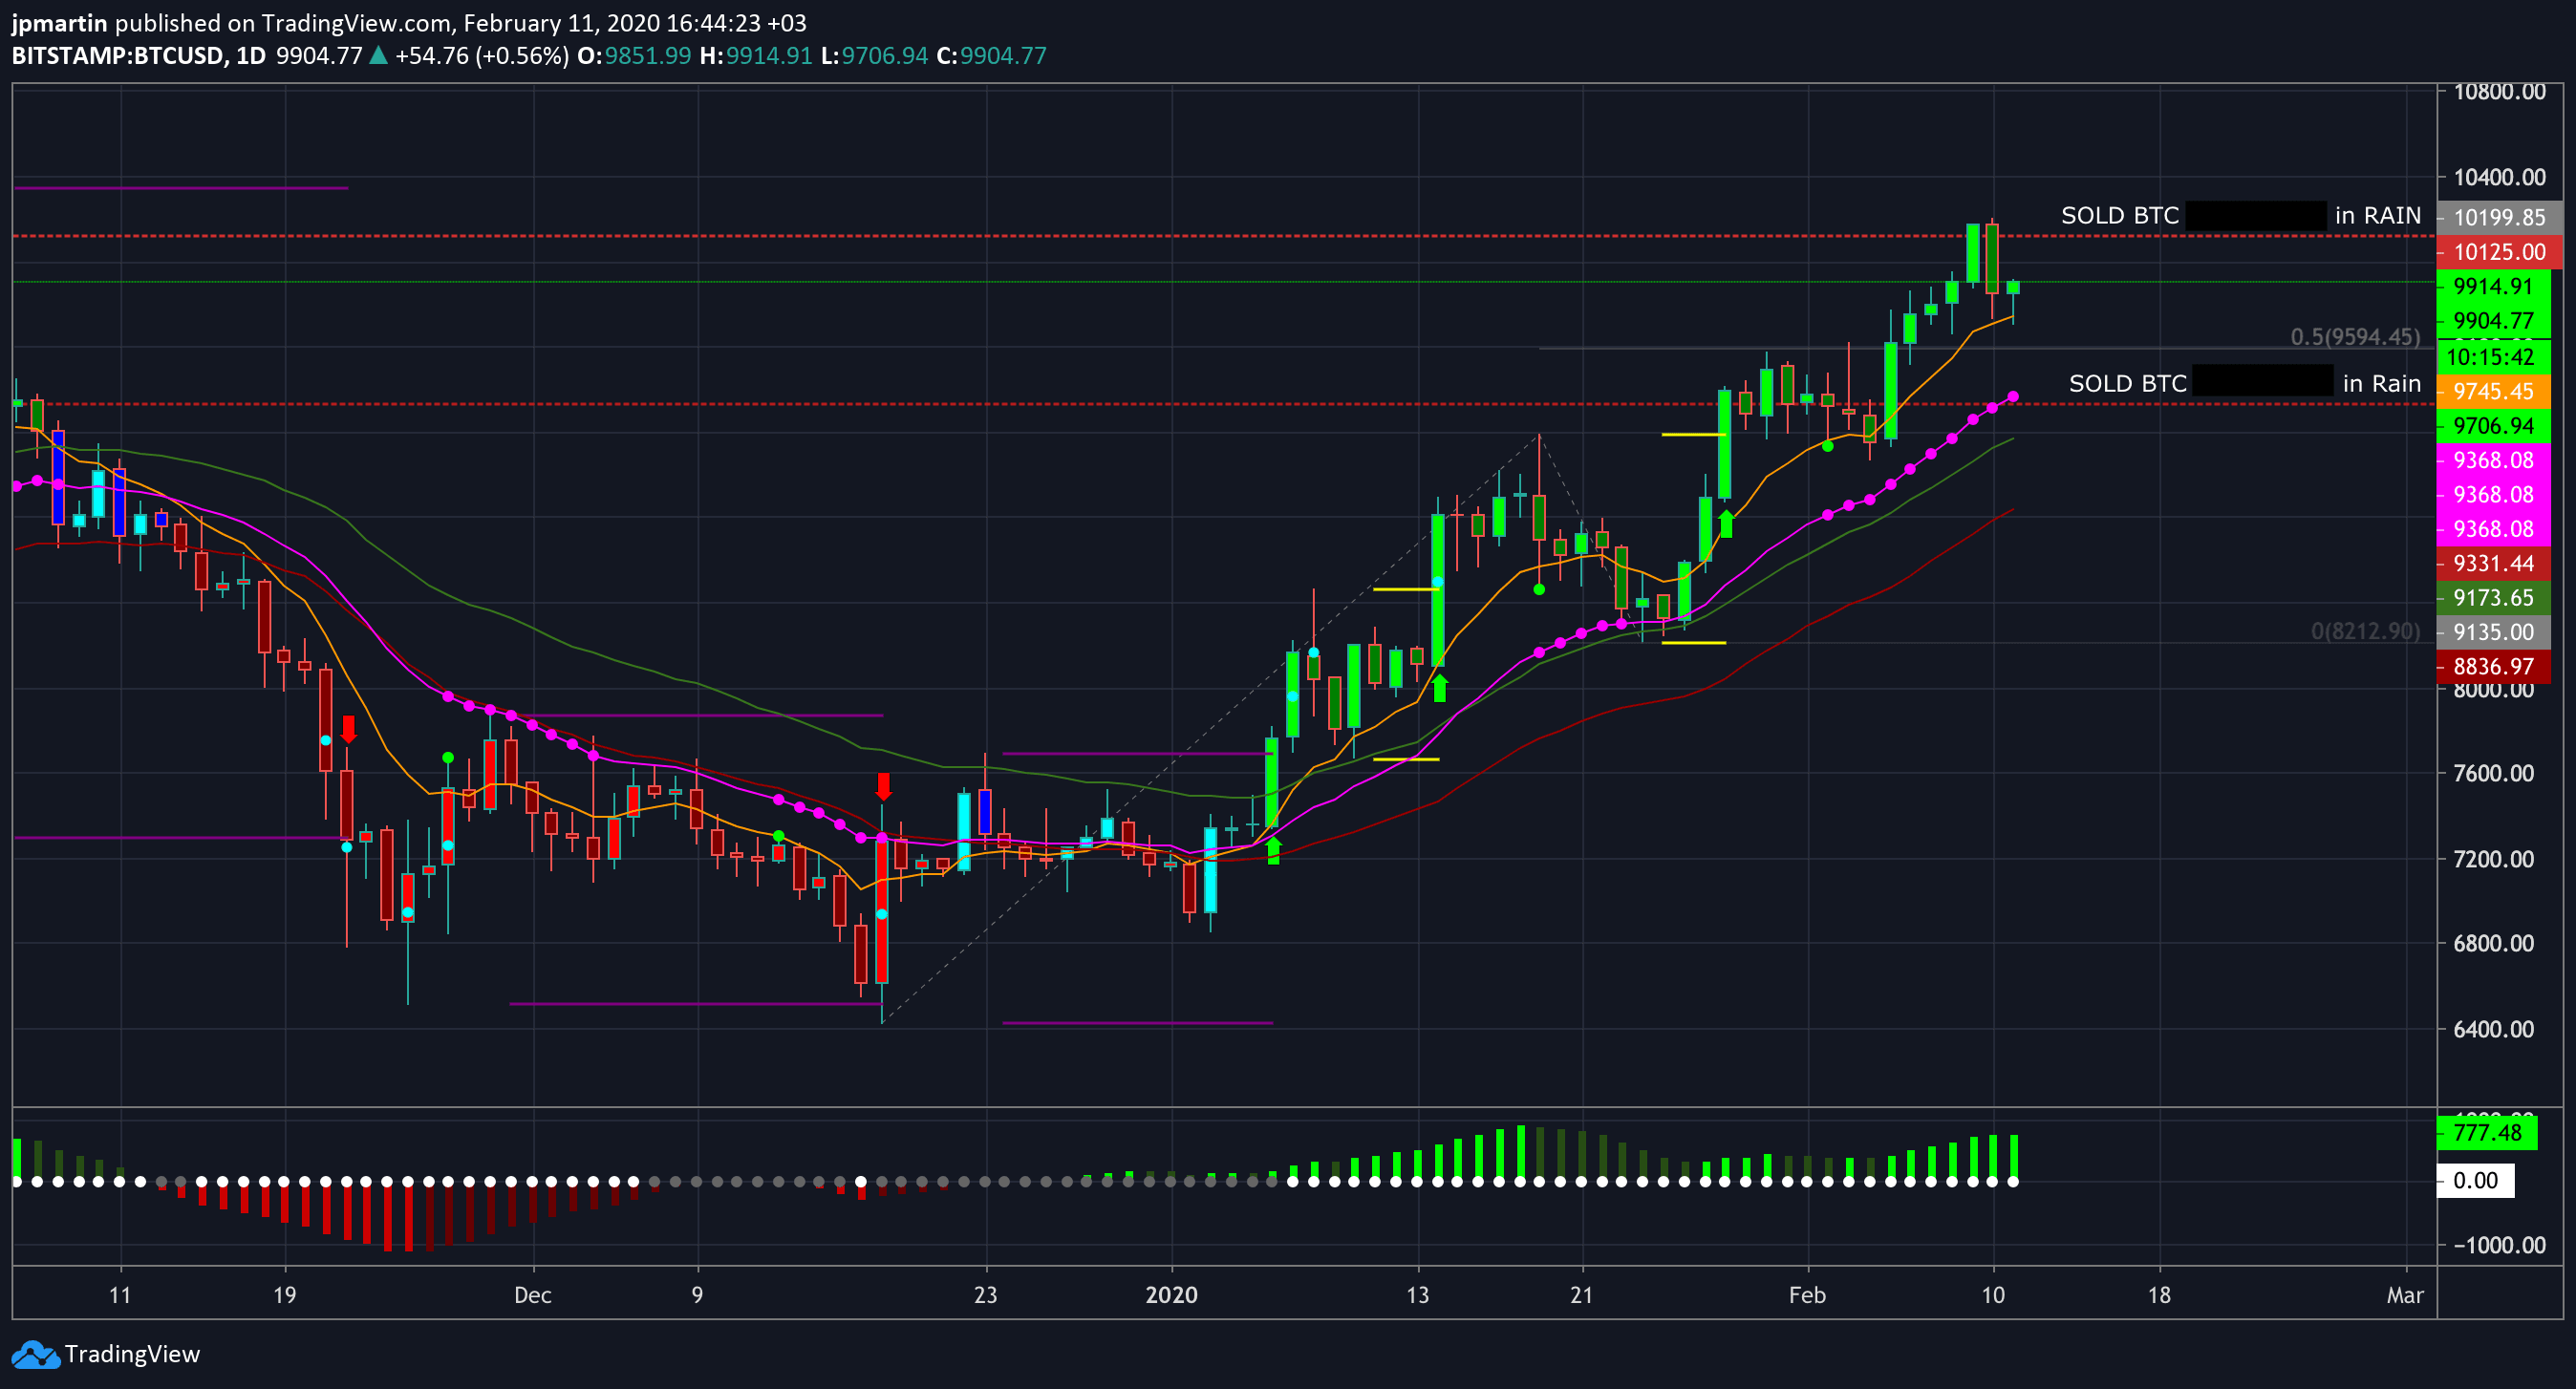 How about booking some profits in Bitcoin (BTCUSD)?